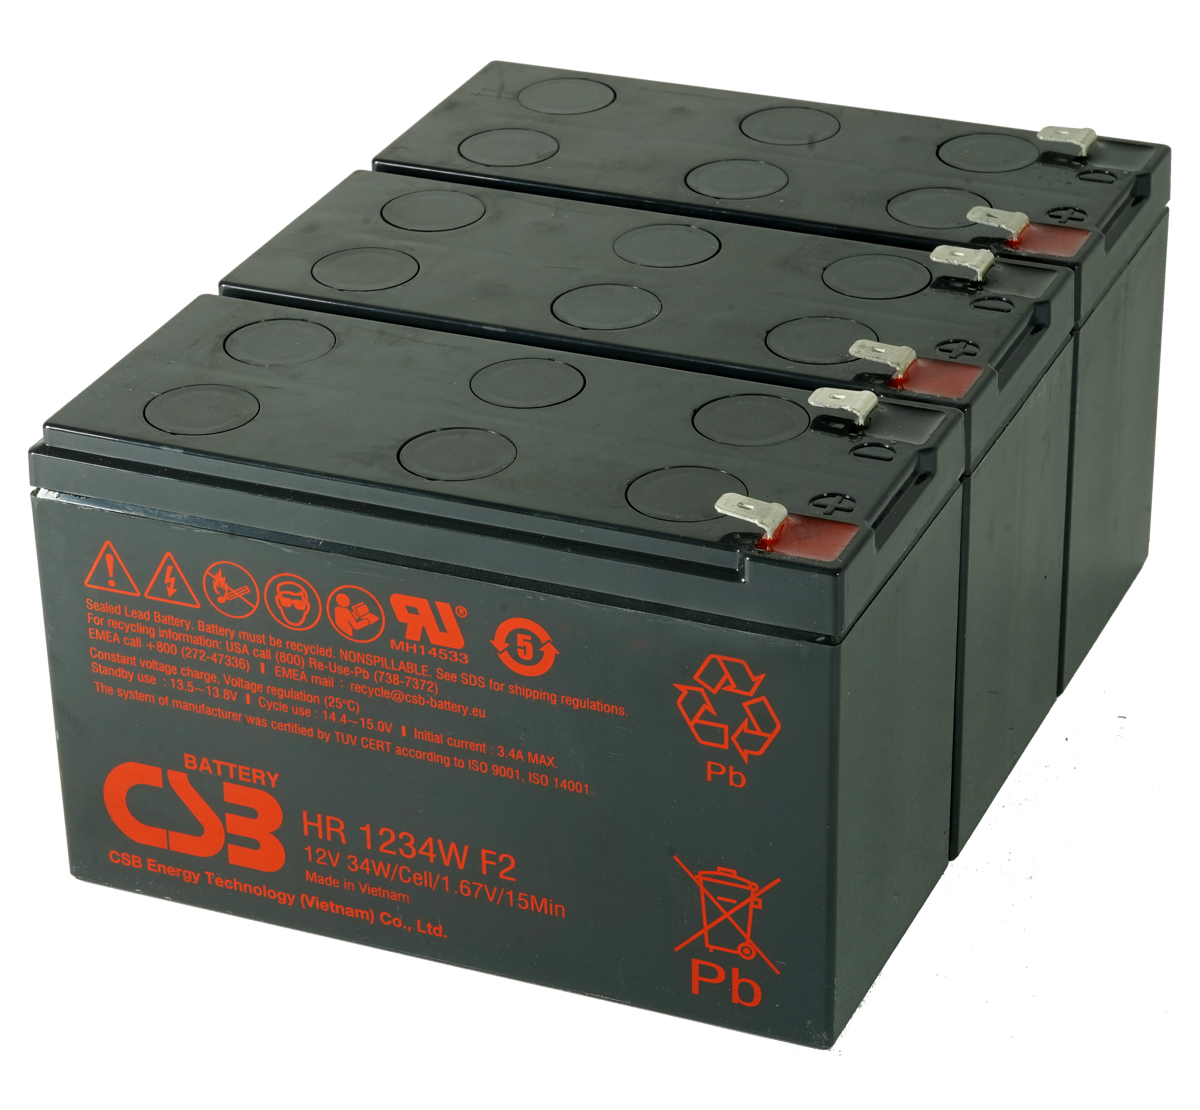 MDS2005 UPS Battery Kit for MGE AB2005